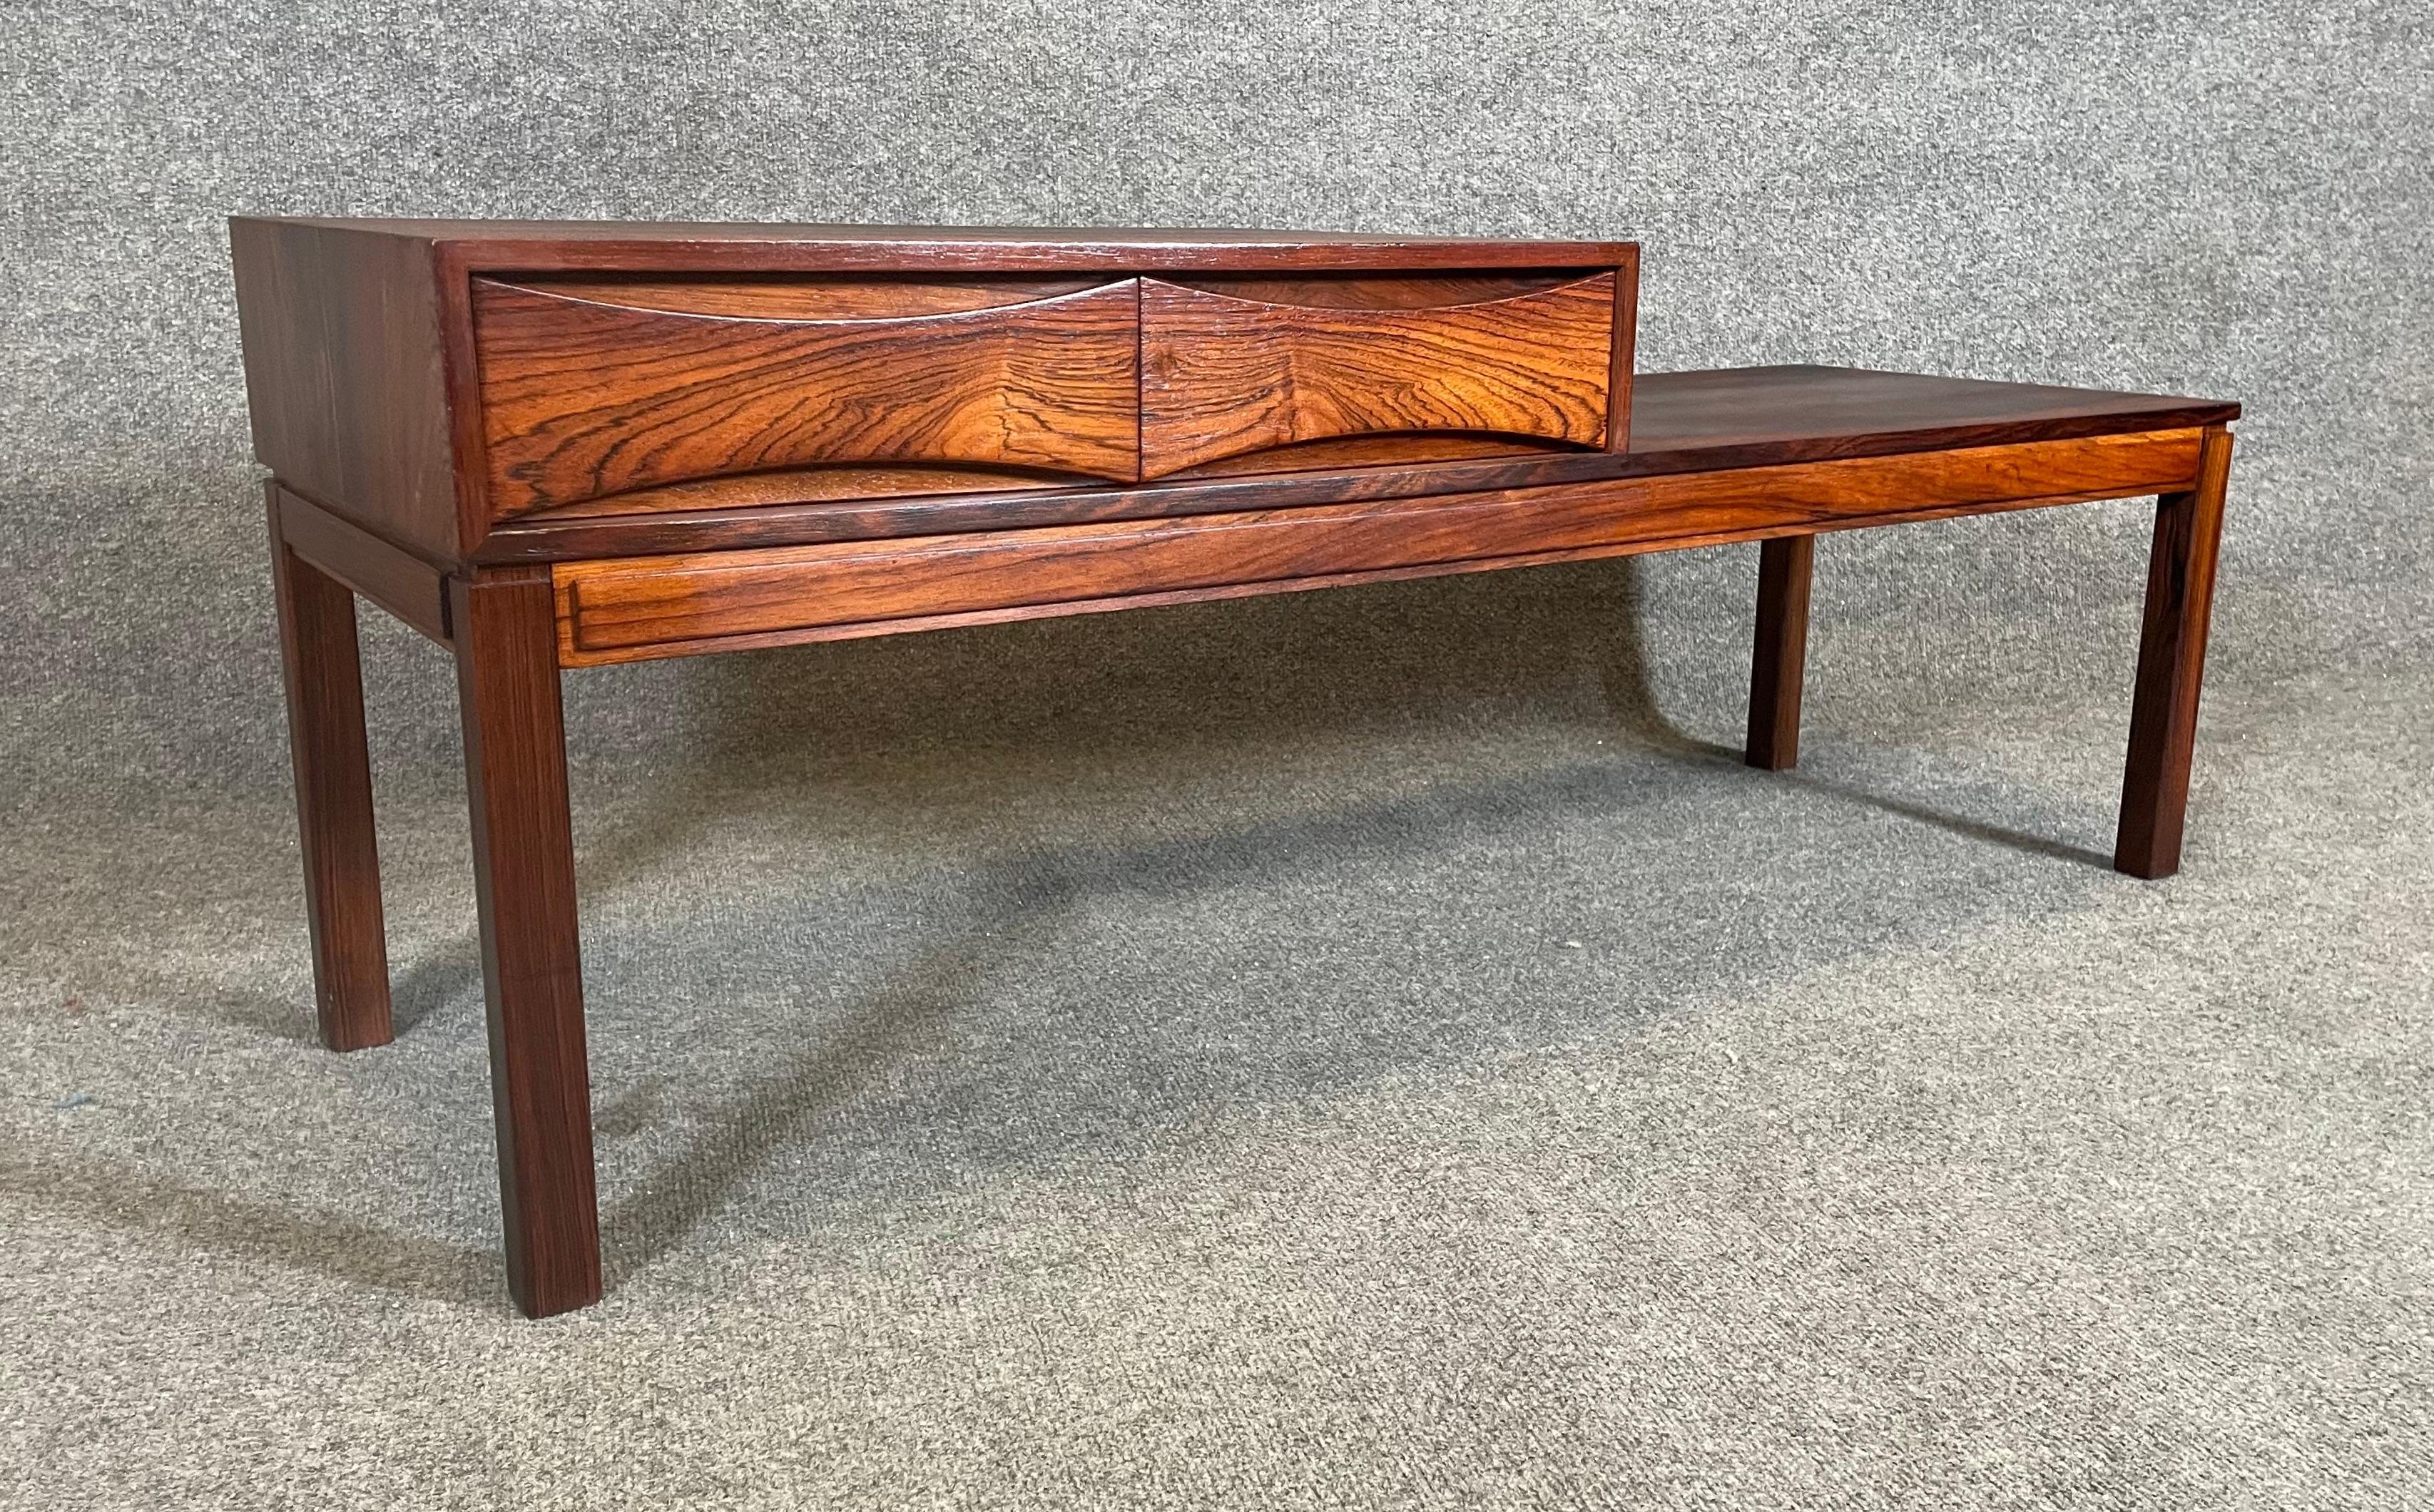 Here is a beautiful scandinavian modern telephone-entry bench in rosewood manufactured by Wards Ateljéer in Denmark in the 1960's.
This exquisite piece, recently imported from Europe to California before its refinishing, features a vibrant wood